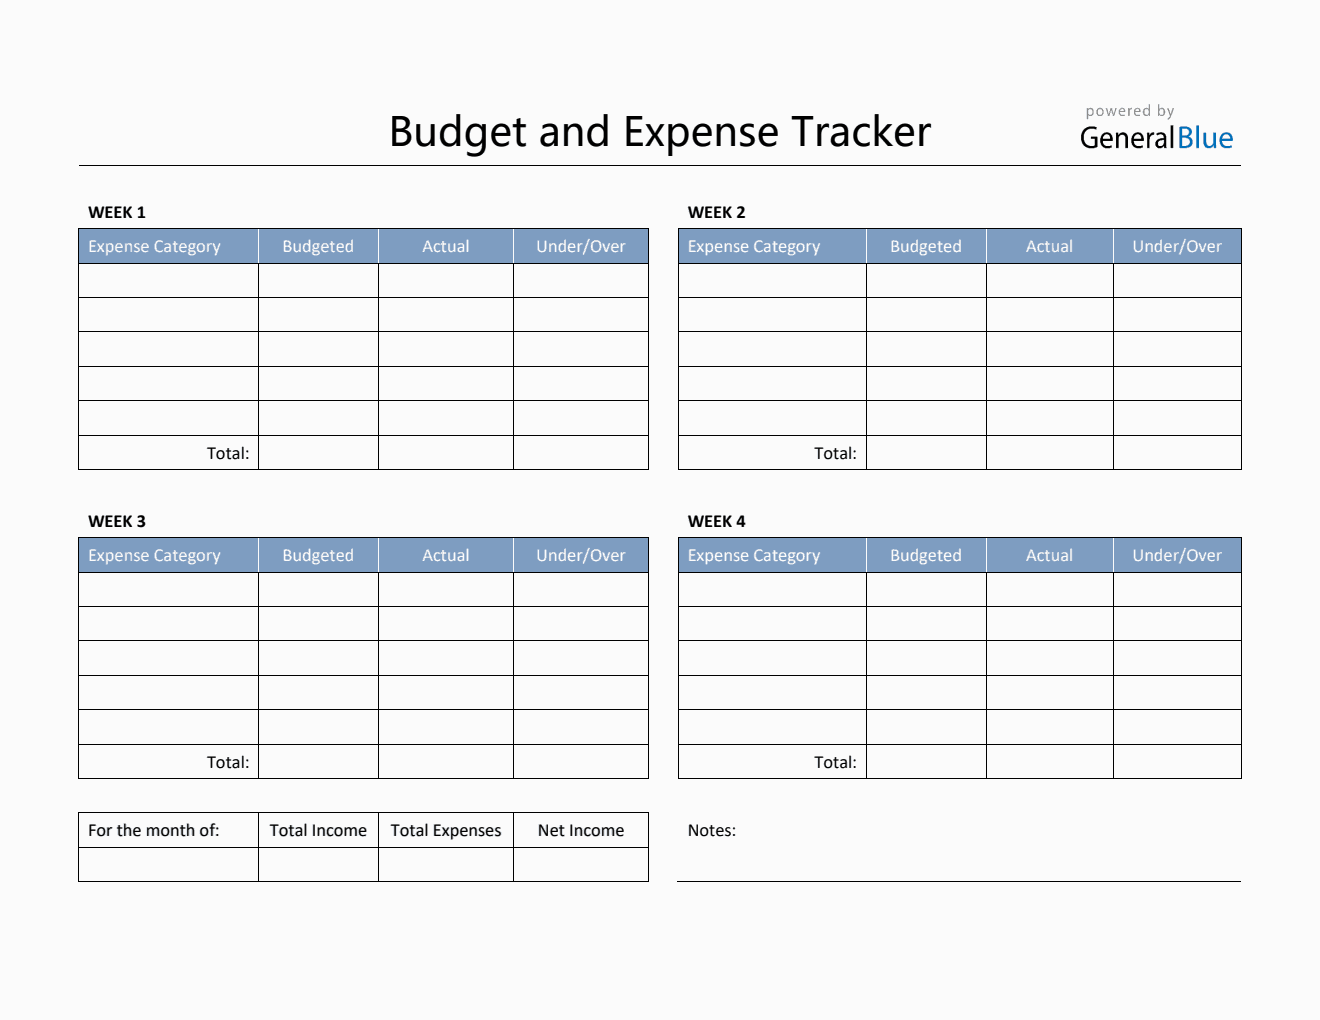 Budget and Expense Tracker in Word (Simple)